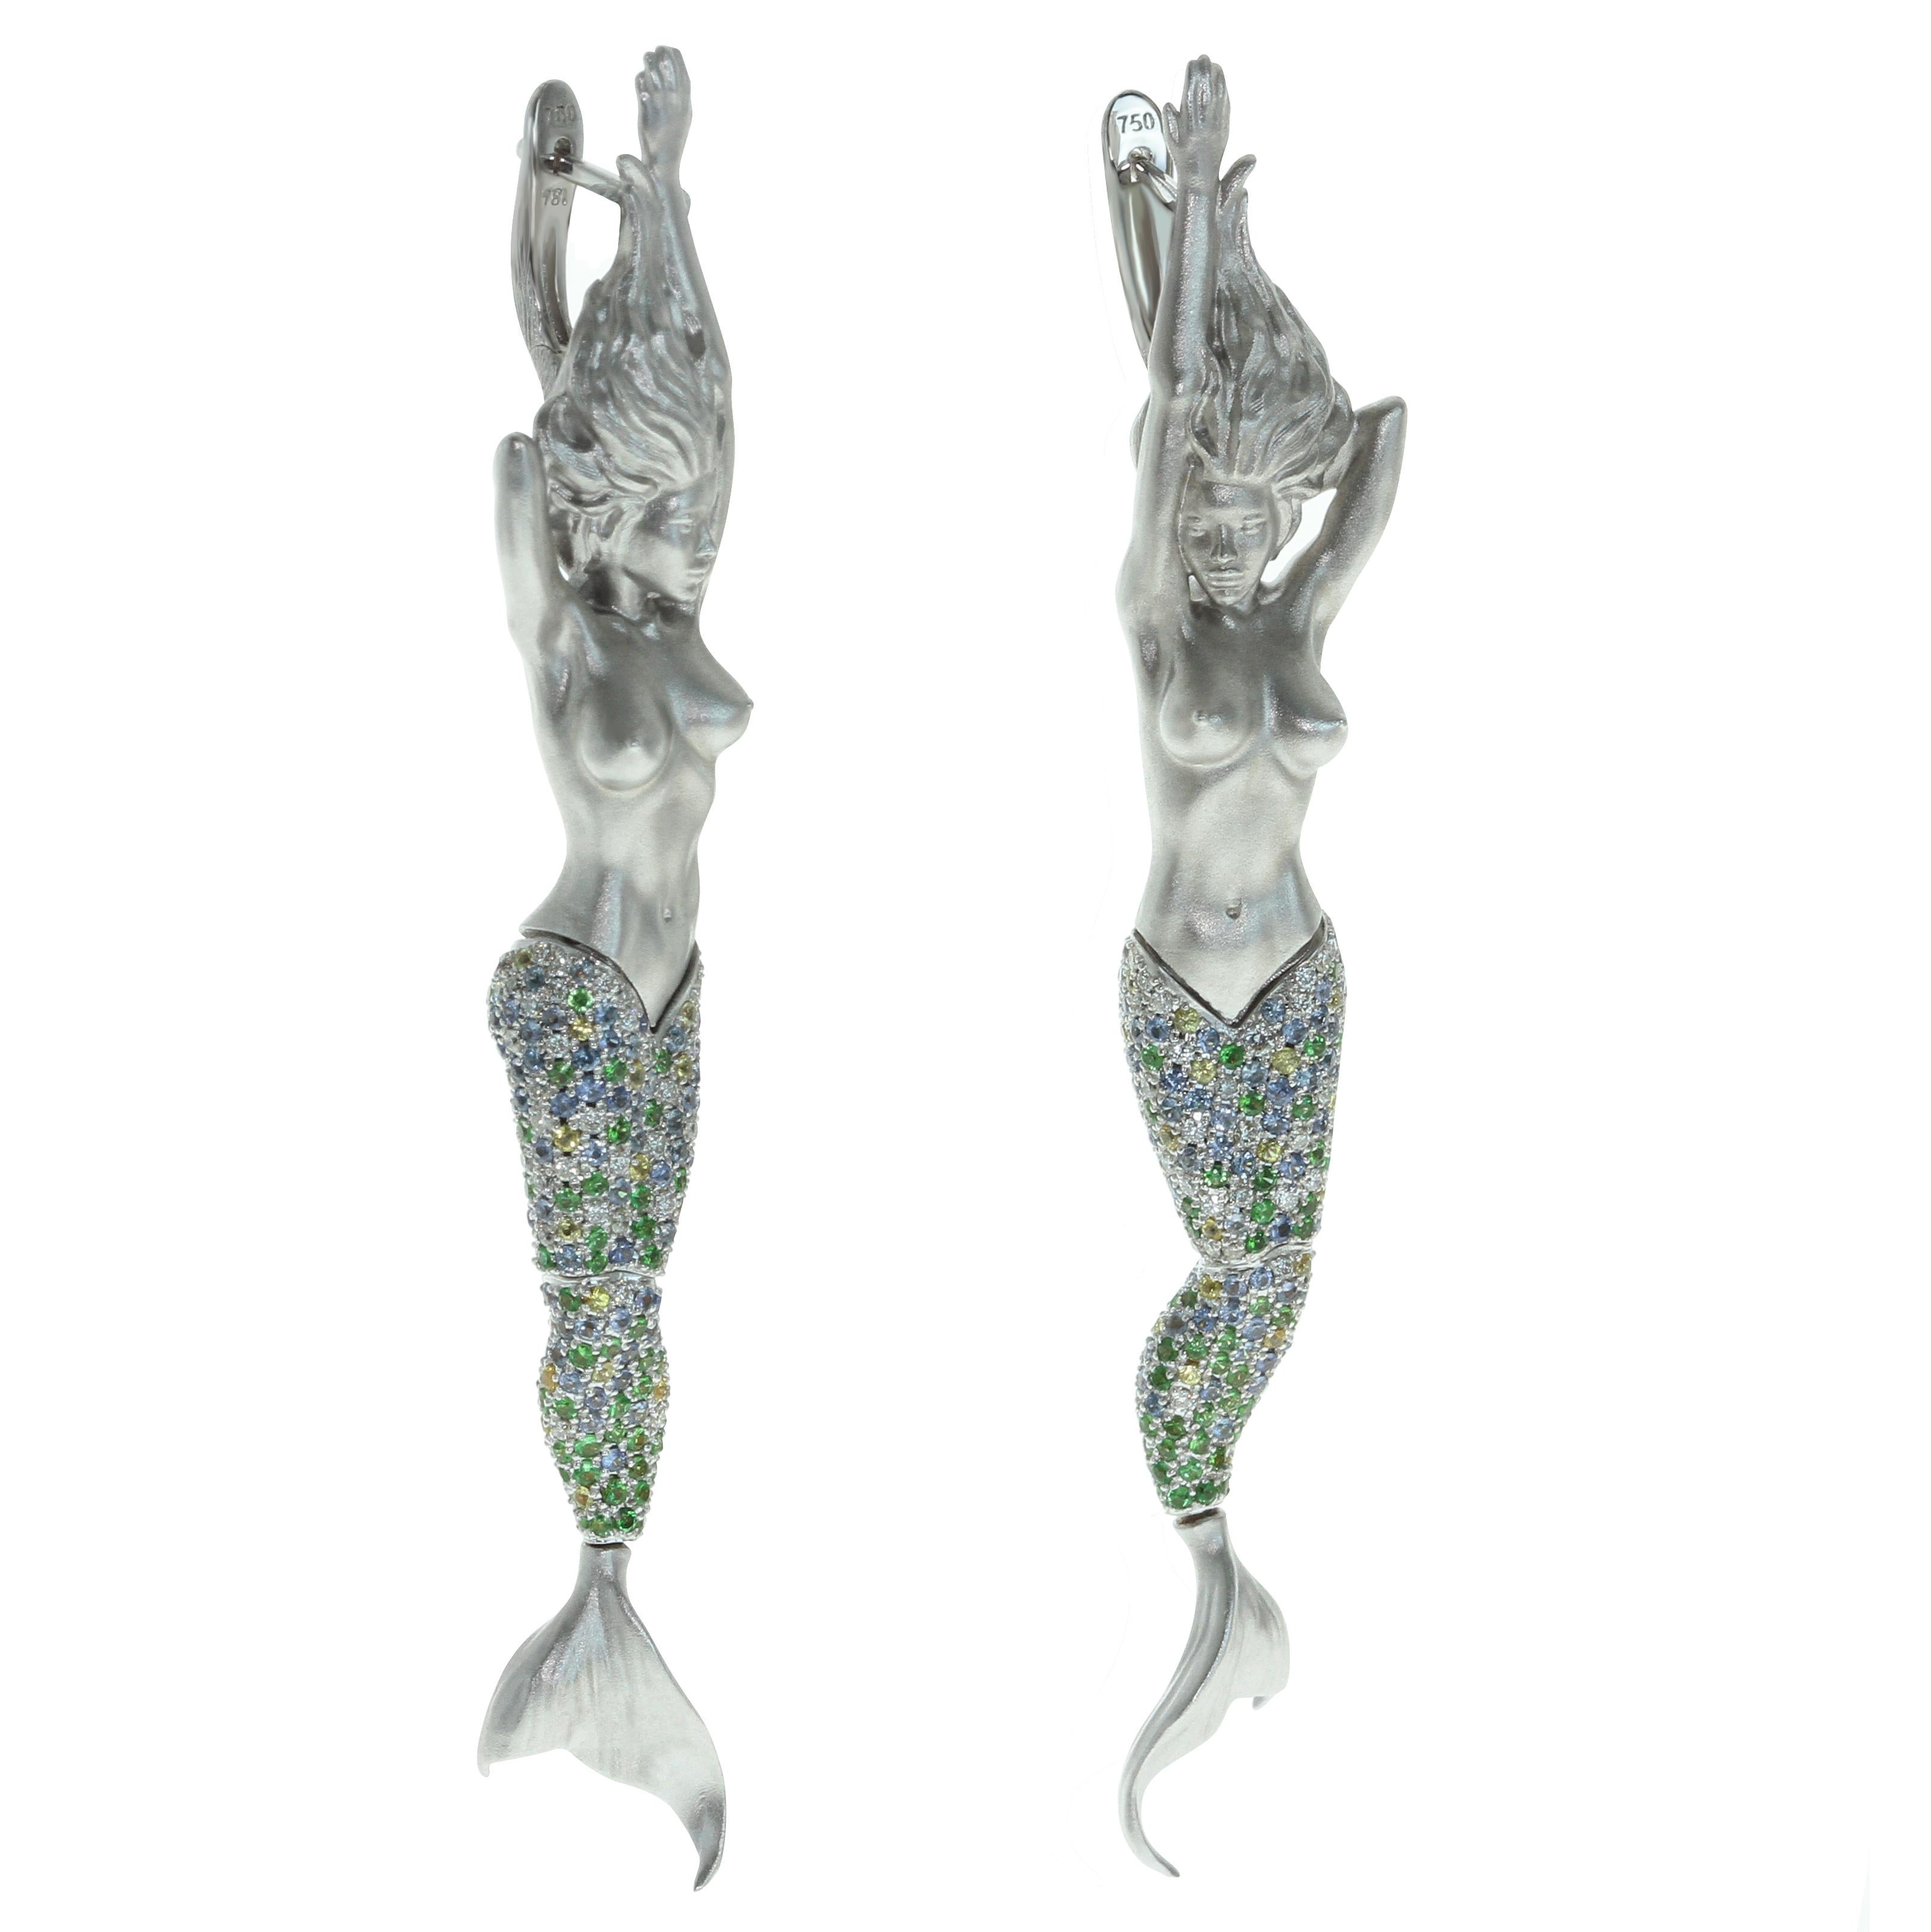 Diamond Sapphire 18 Karat White Gold Mermaid Earrings

Are You hear the Mermaids song from unhabited island?  They sing only for You. 
Feel the Mermaid sensuality once You fit this fairytale suite. All eyes will be on you only. The fairytale can be